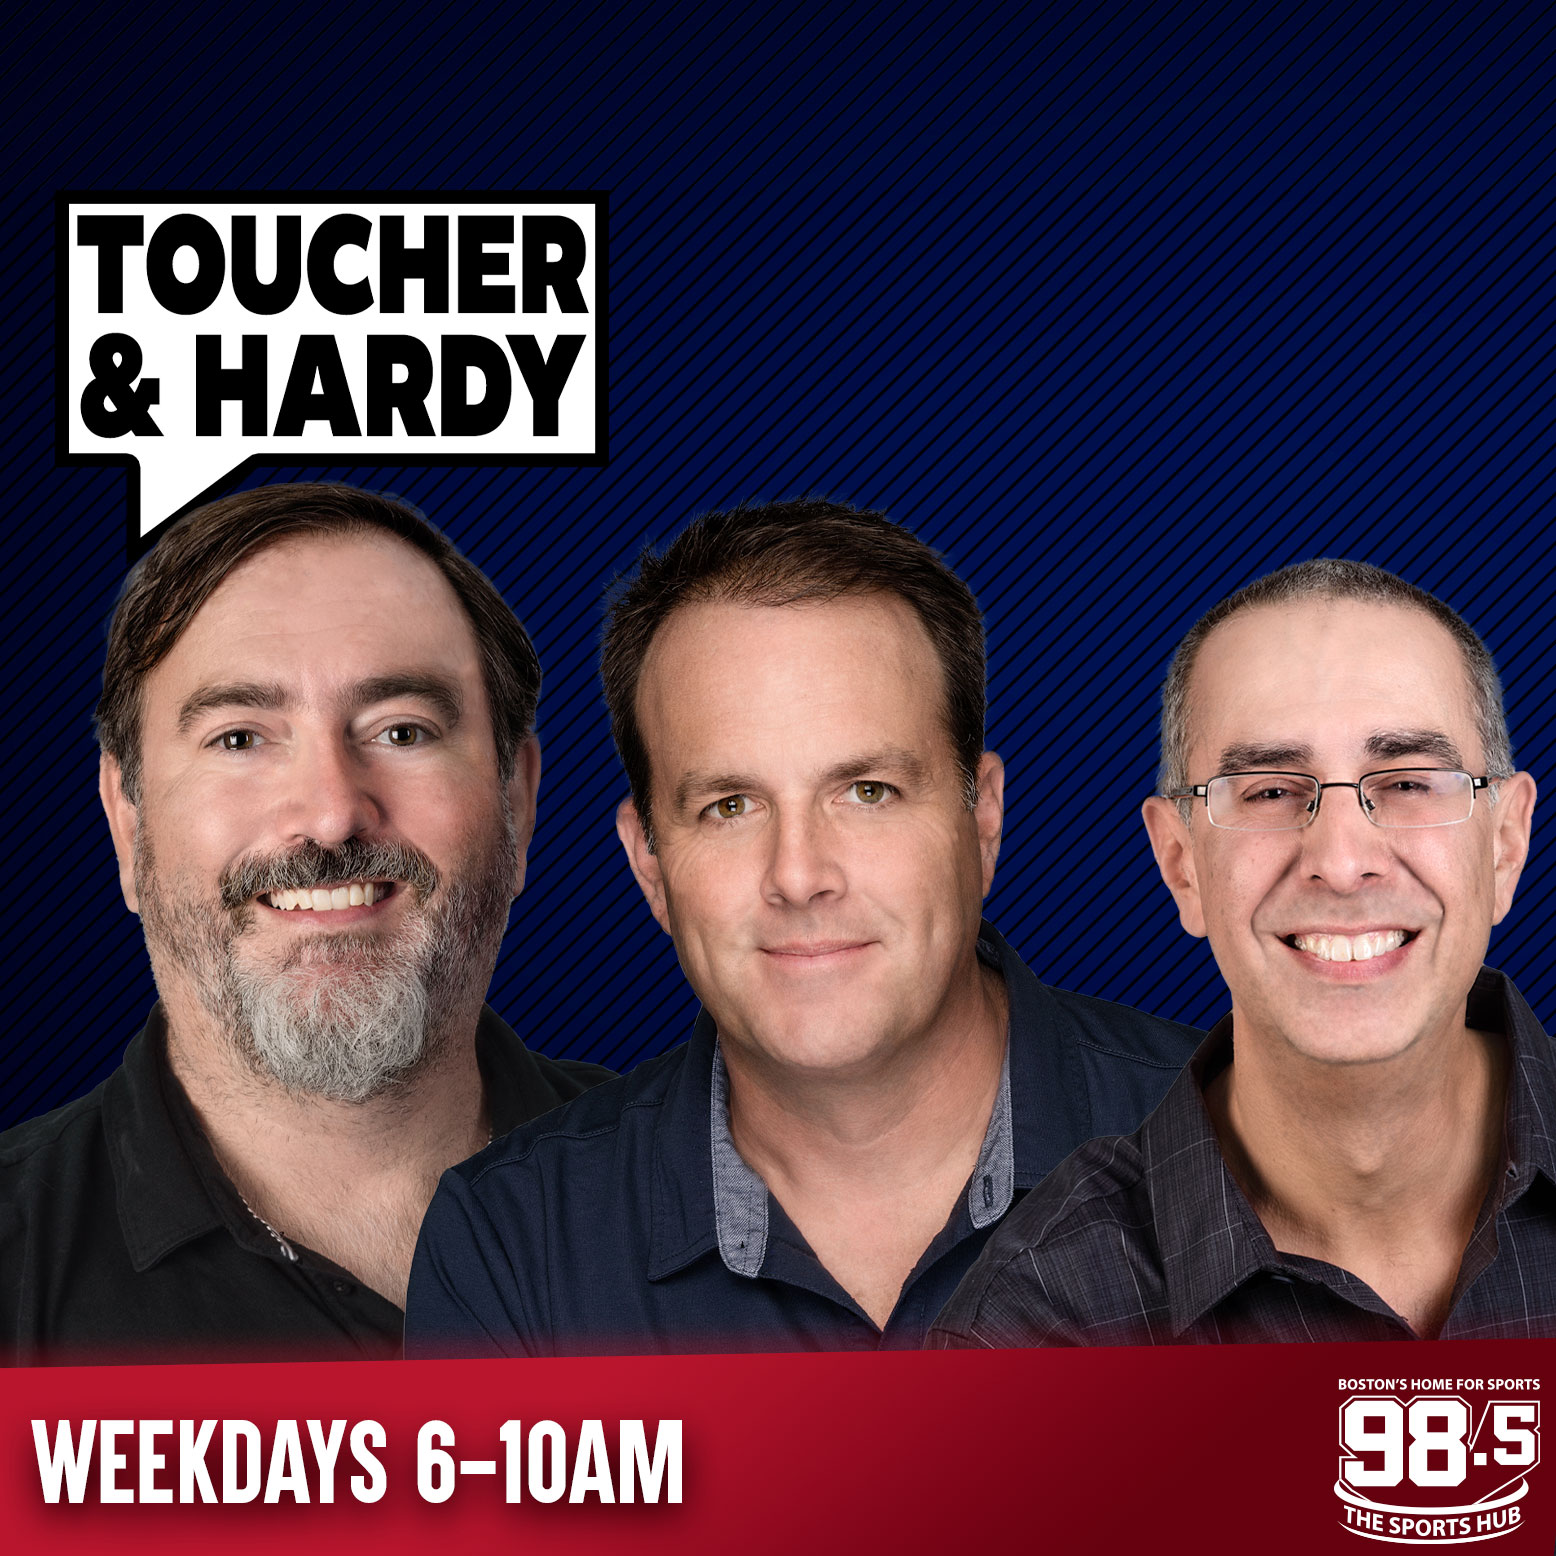 Why are the Patriots starting involuntary practices a week late? - Toucher & Hardy